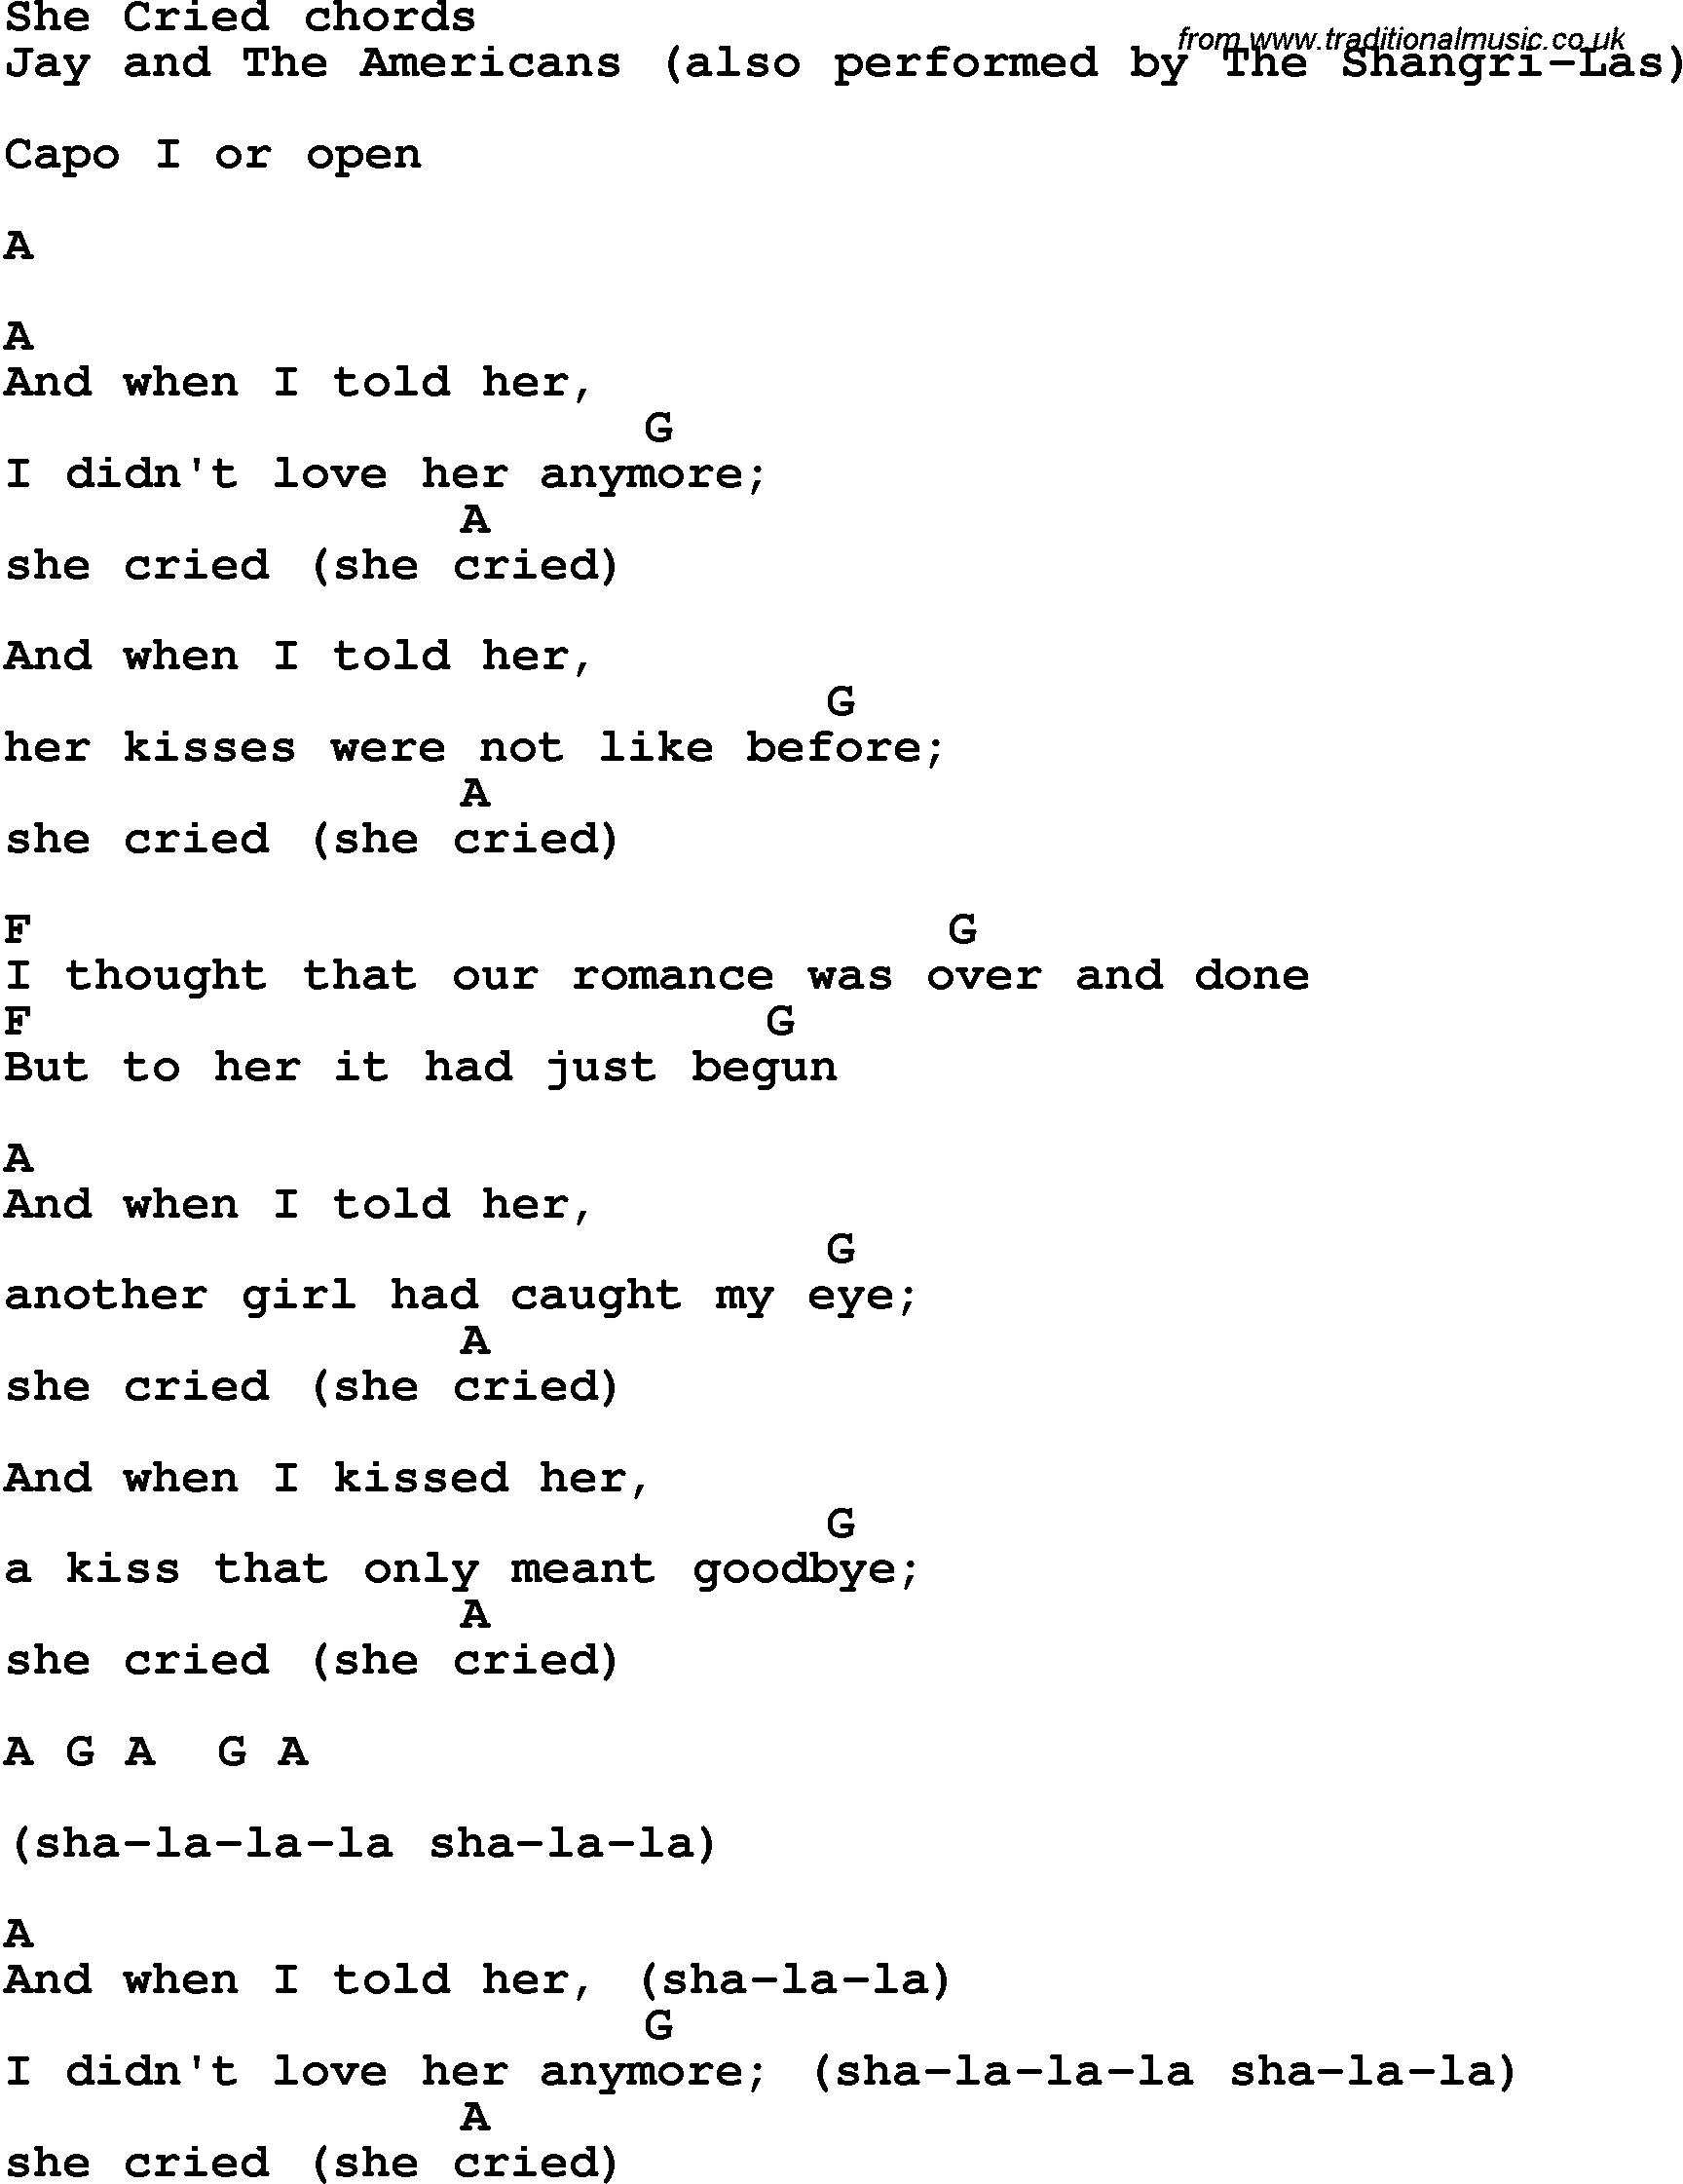 Song Lyrics with guitar chords for She Cried